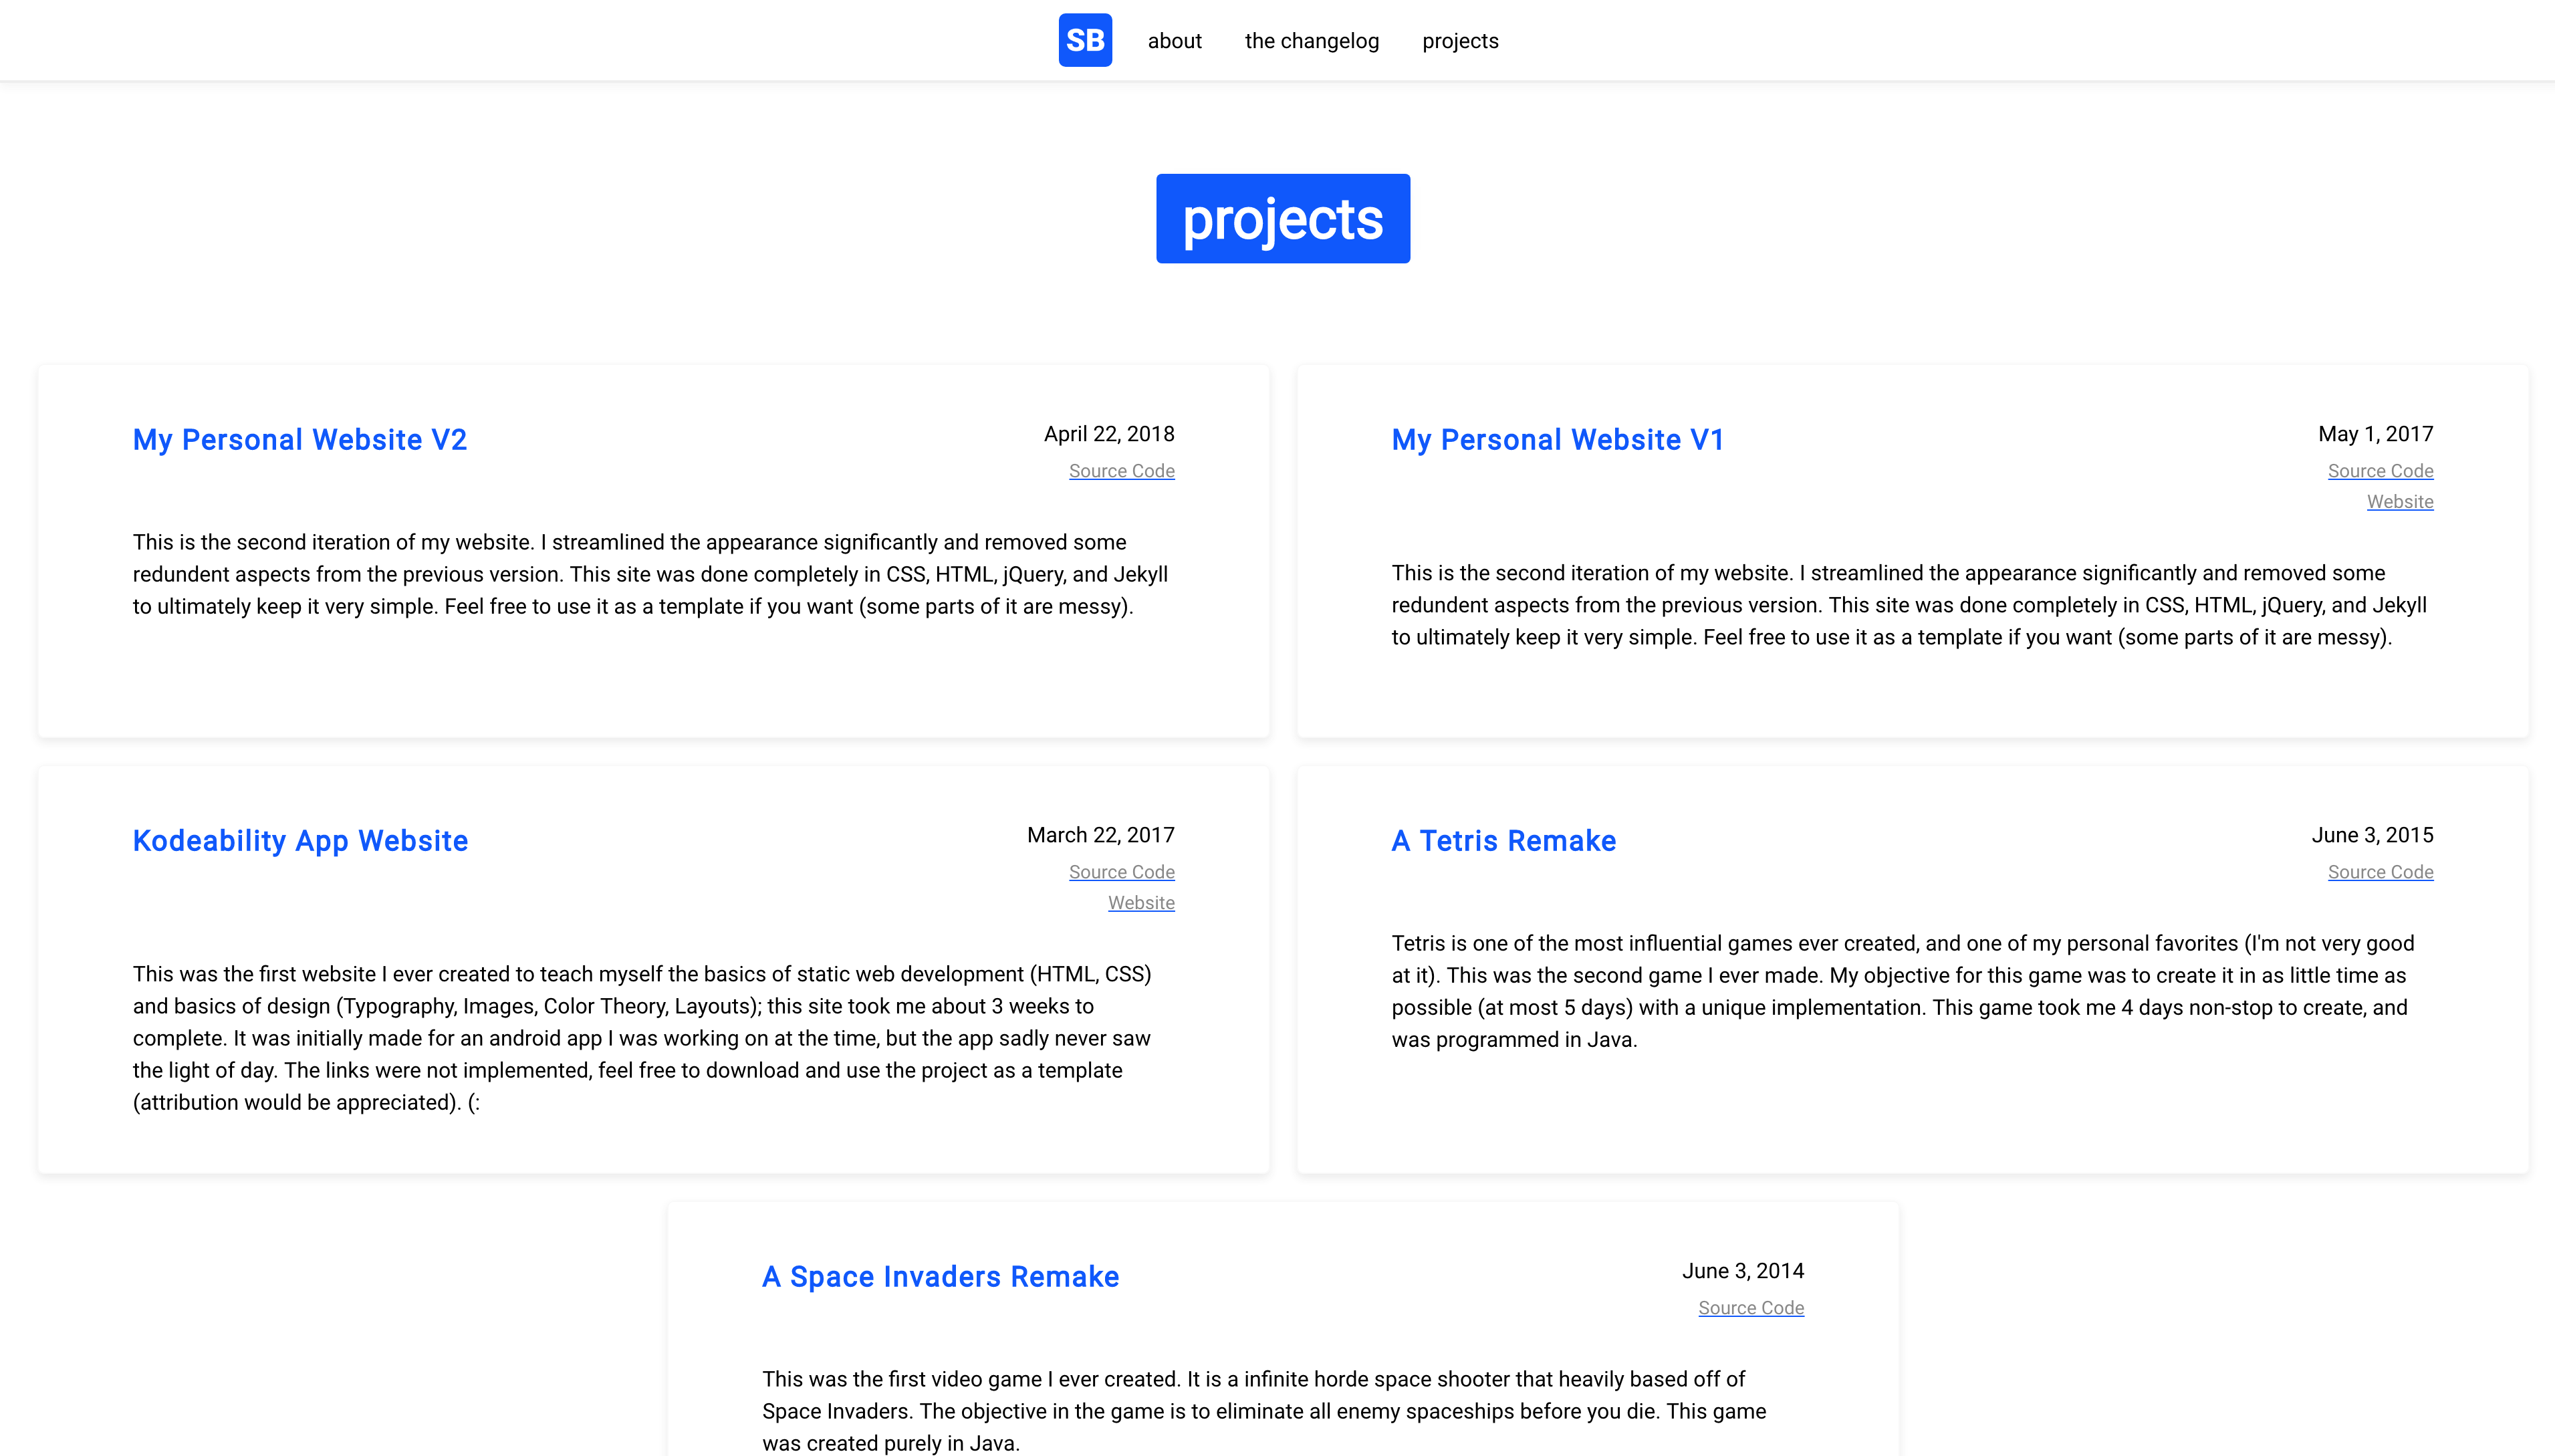 Personal site v3 projects page